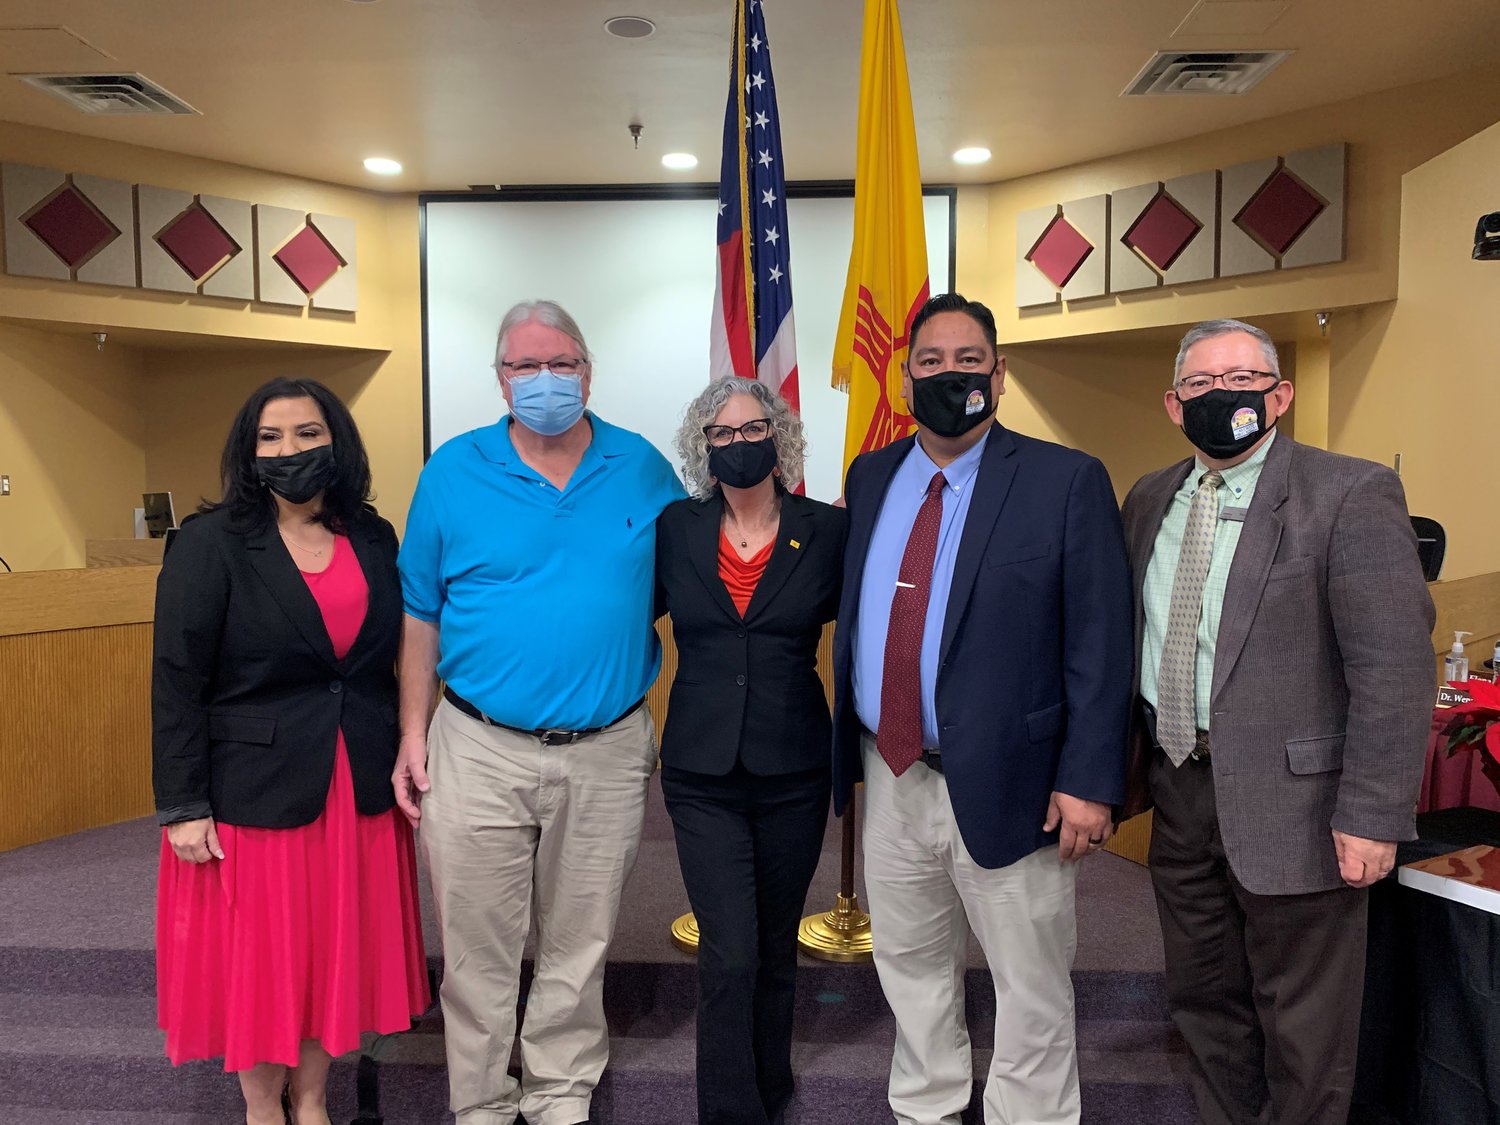 Left to right are Doña Ana County Clerk Amanda López Askin, incoming Las Cruces Public Schools Board of Education member Bob Wofford, current board members Pamela Cort and Ray Jaramillo and LCPS Superintendent Ralph Ramos.